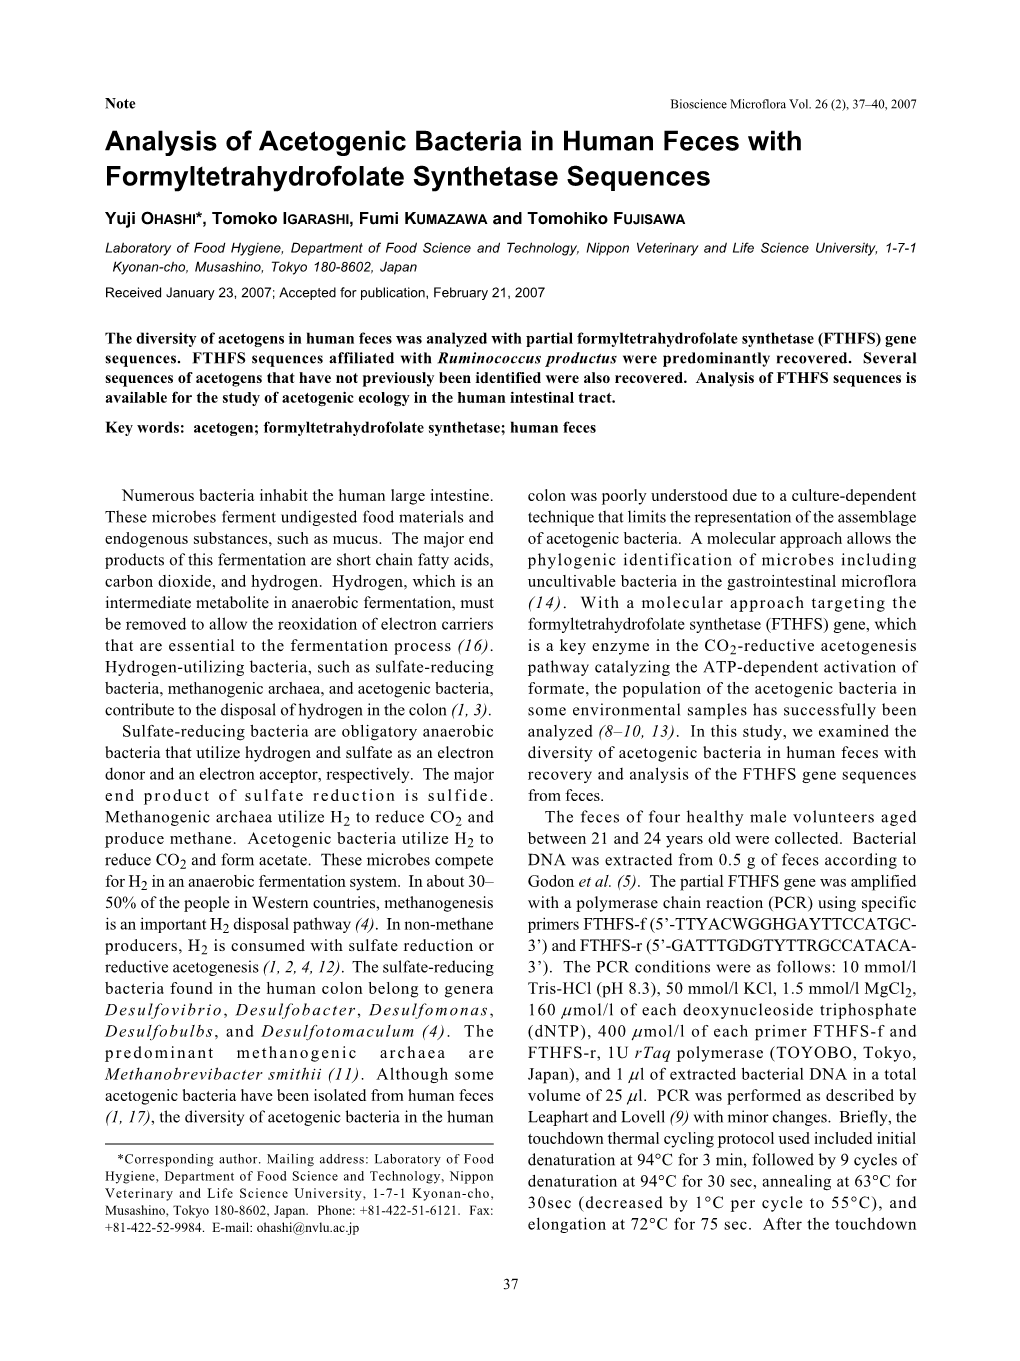 Analysis of Acetogenic Bacteria in Human Feces with Formyltetrahydrofolate Synthetase Sequences